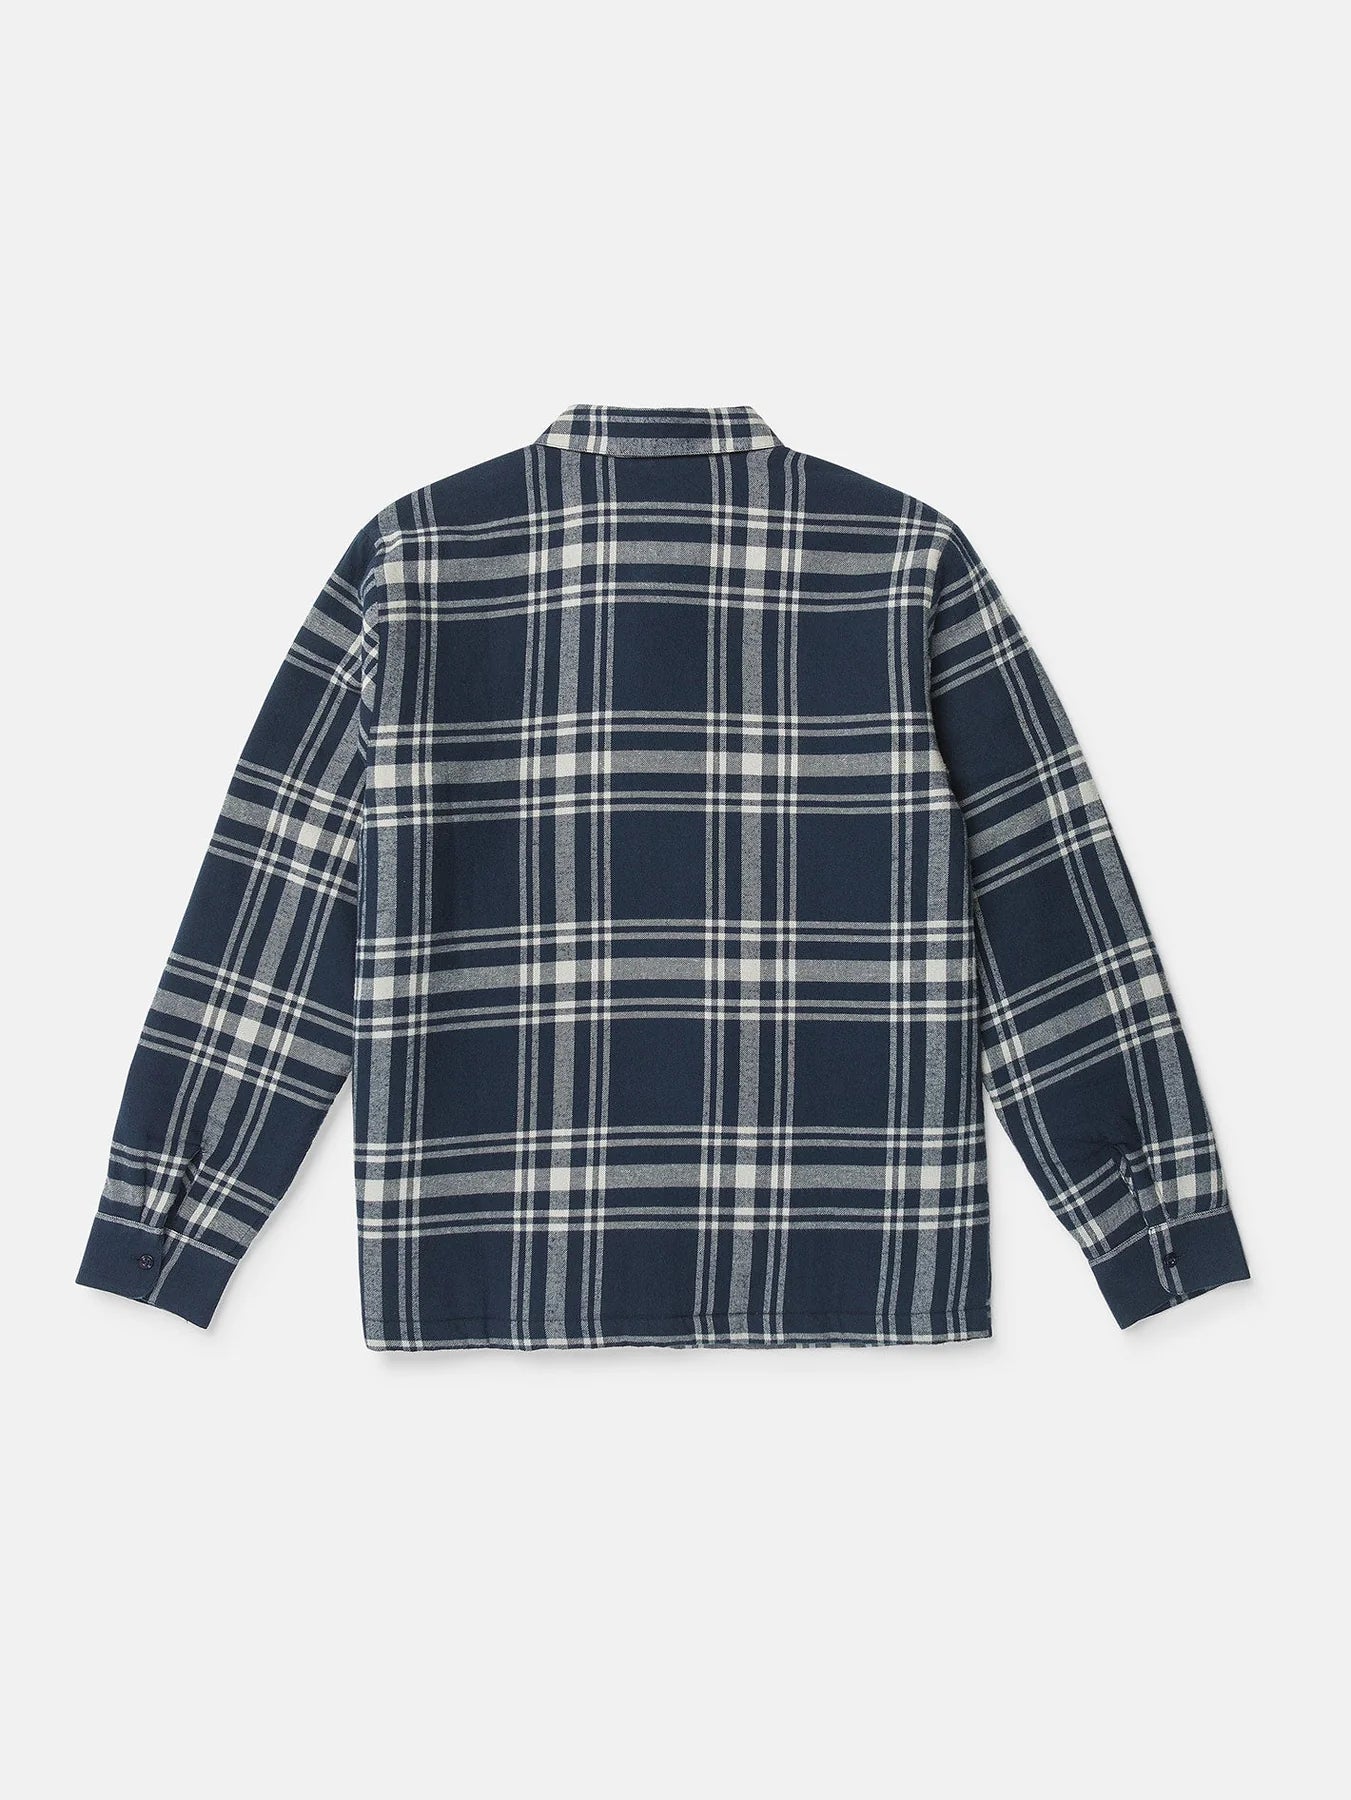 Northport Lined Long Sleeve Flannel in Navy